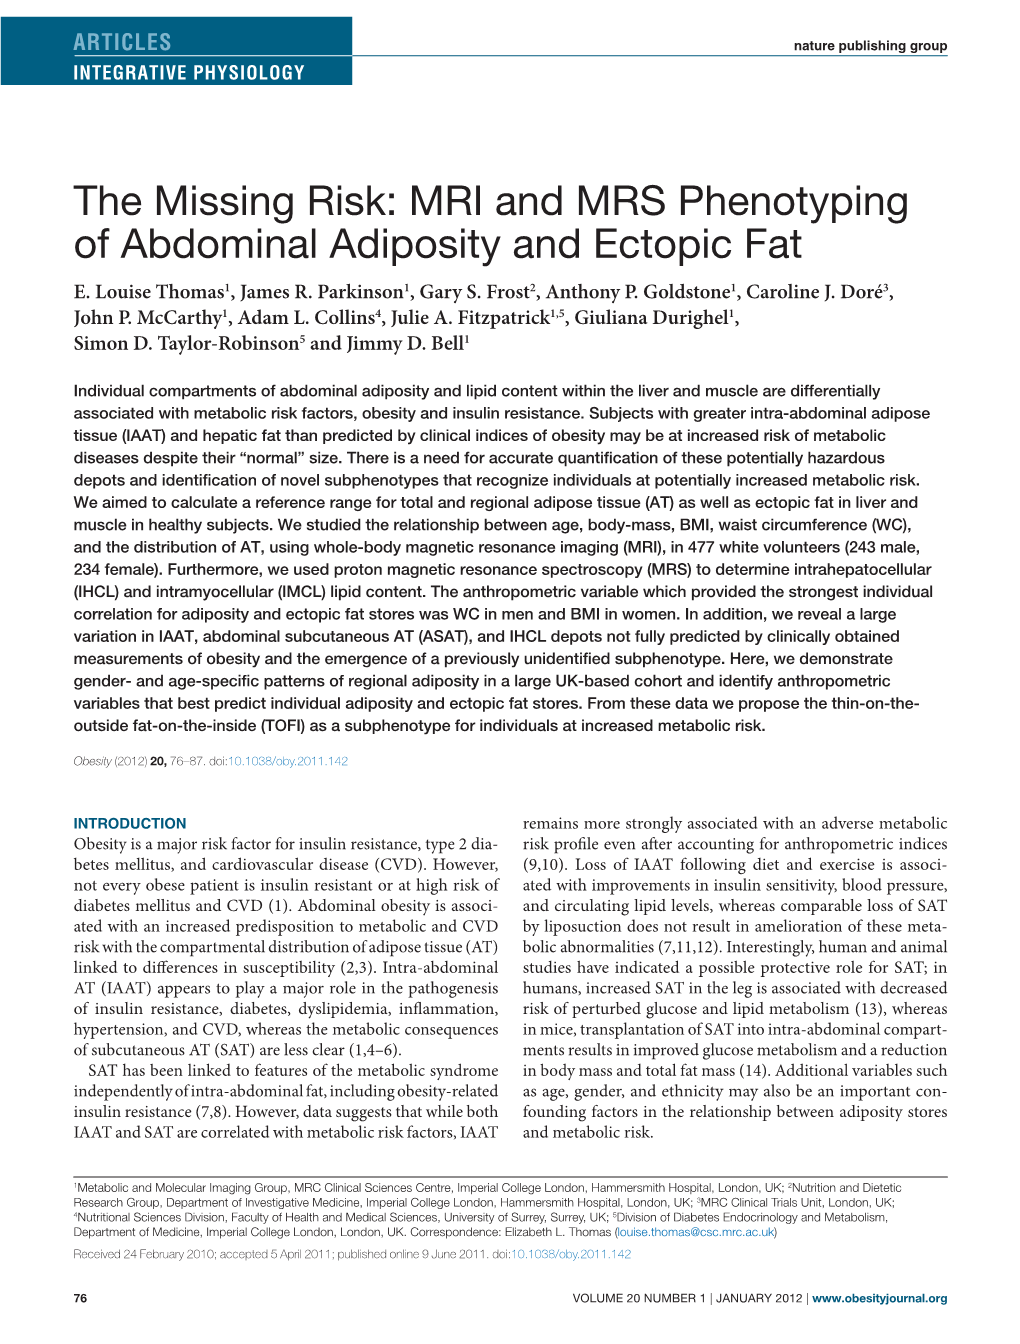 MRI and MRS Phenotyping of Abdominal Adiposity and Ectopic Fat E